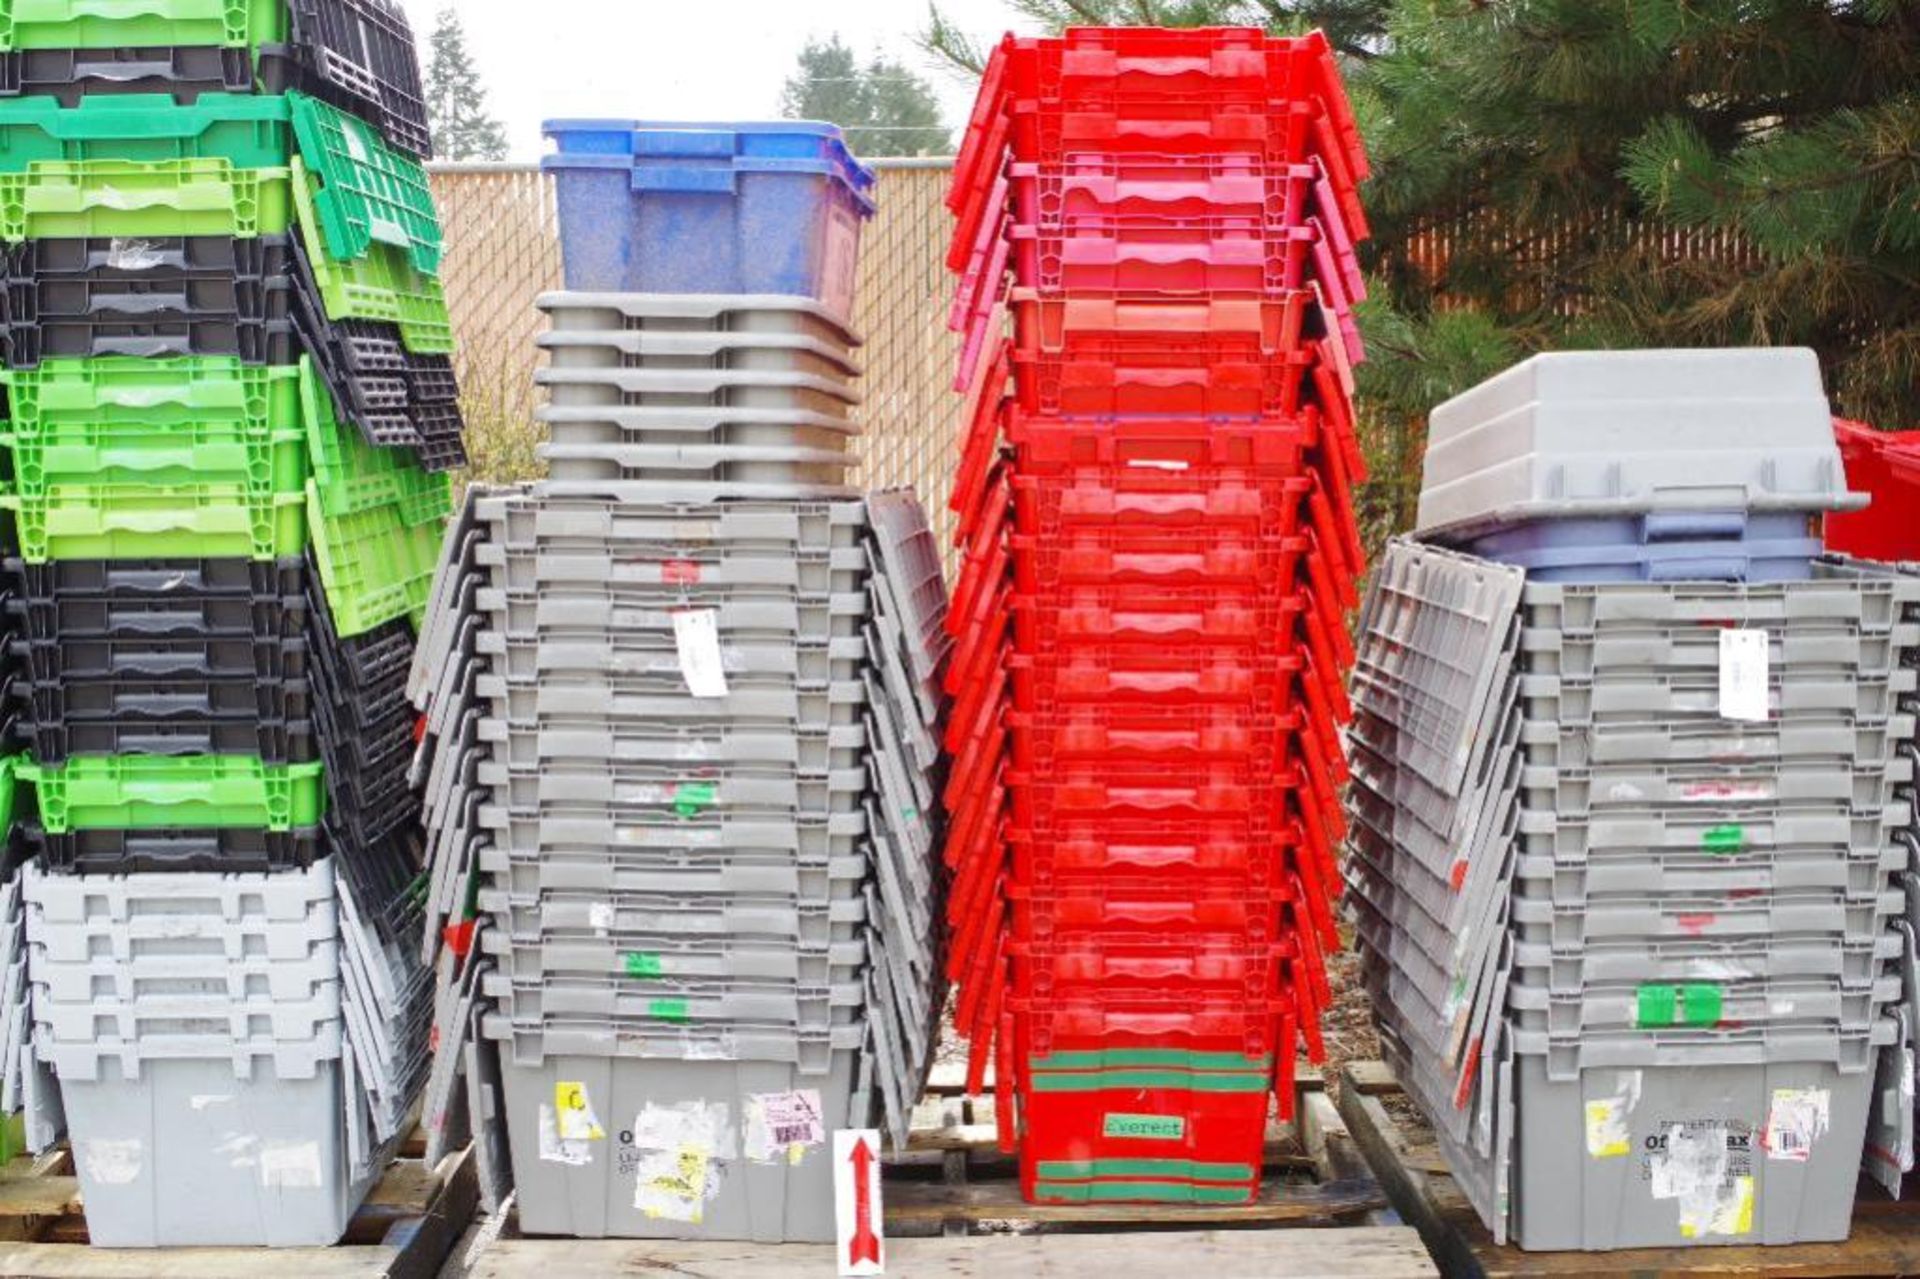 (QTY) Pallet of Plastic Bins & Storage Containers (One Pallet - Middle Grey & Red Stacks) - Image 2 of 2